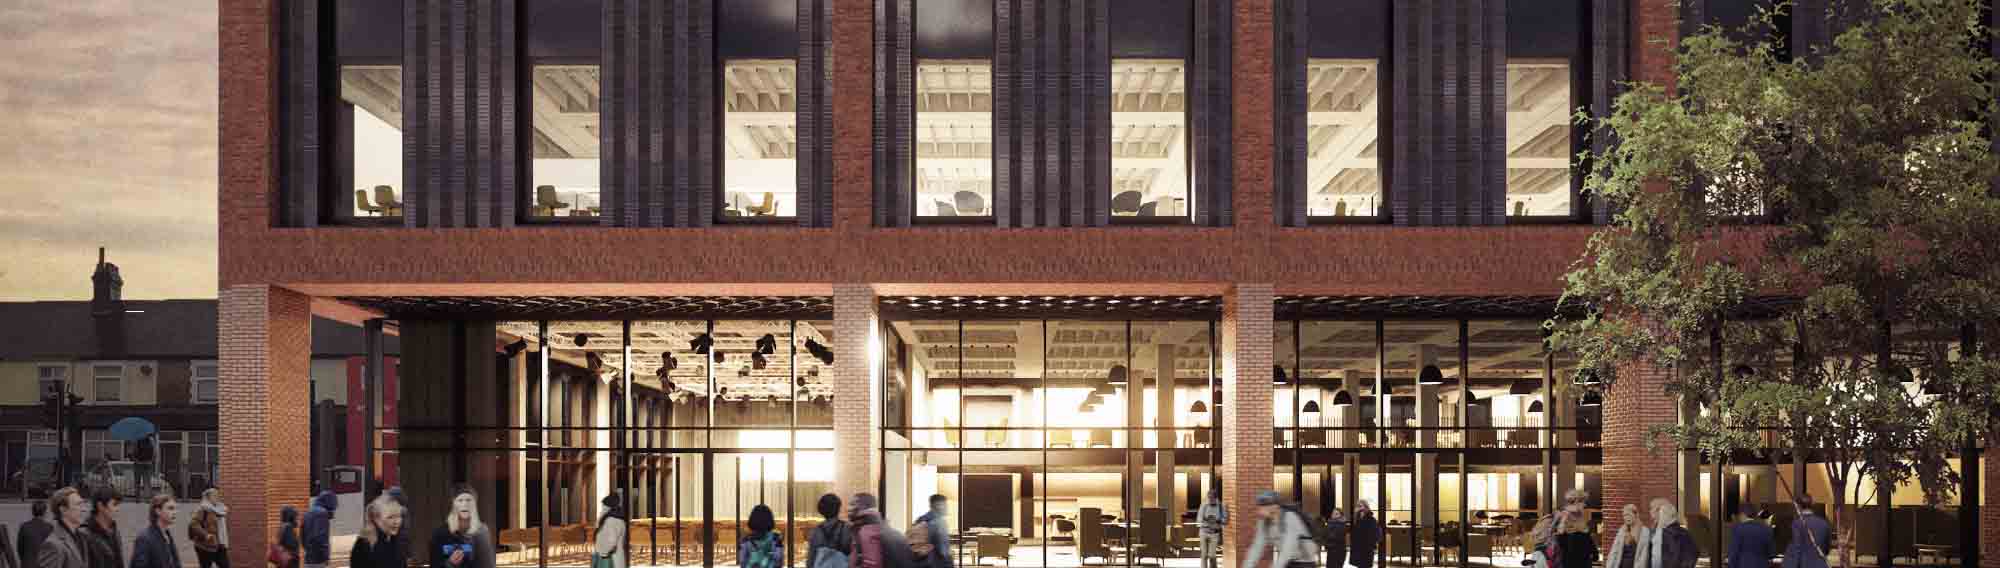 artist impression of the new catalyst building